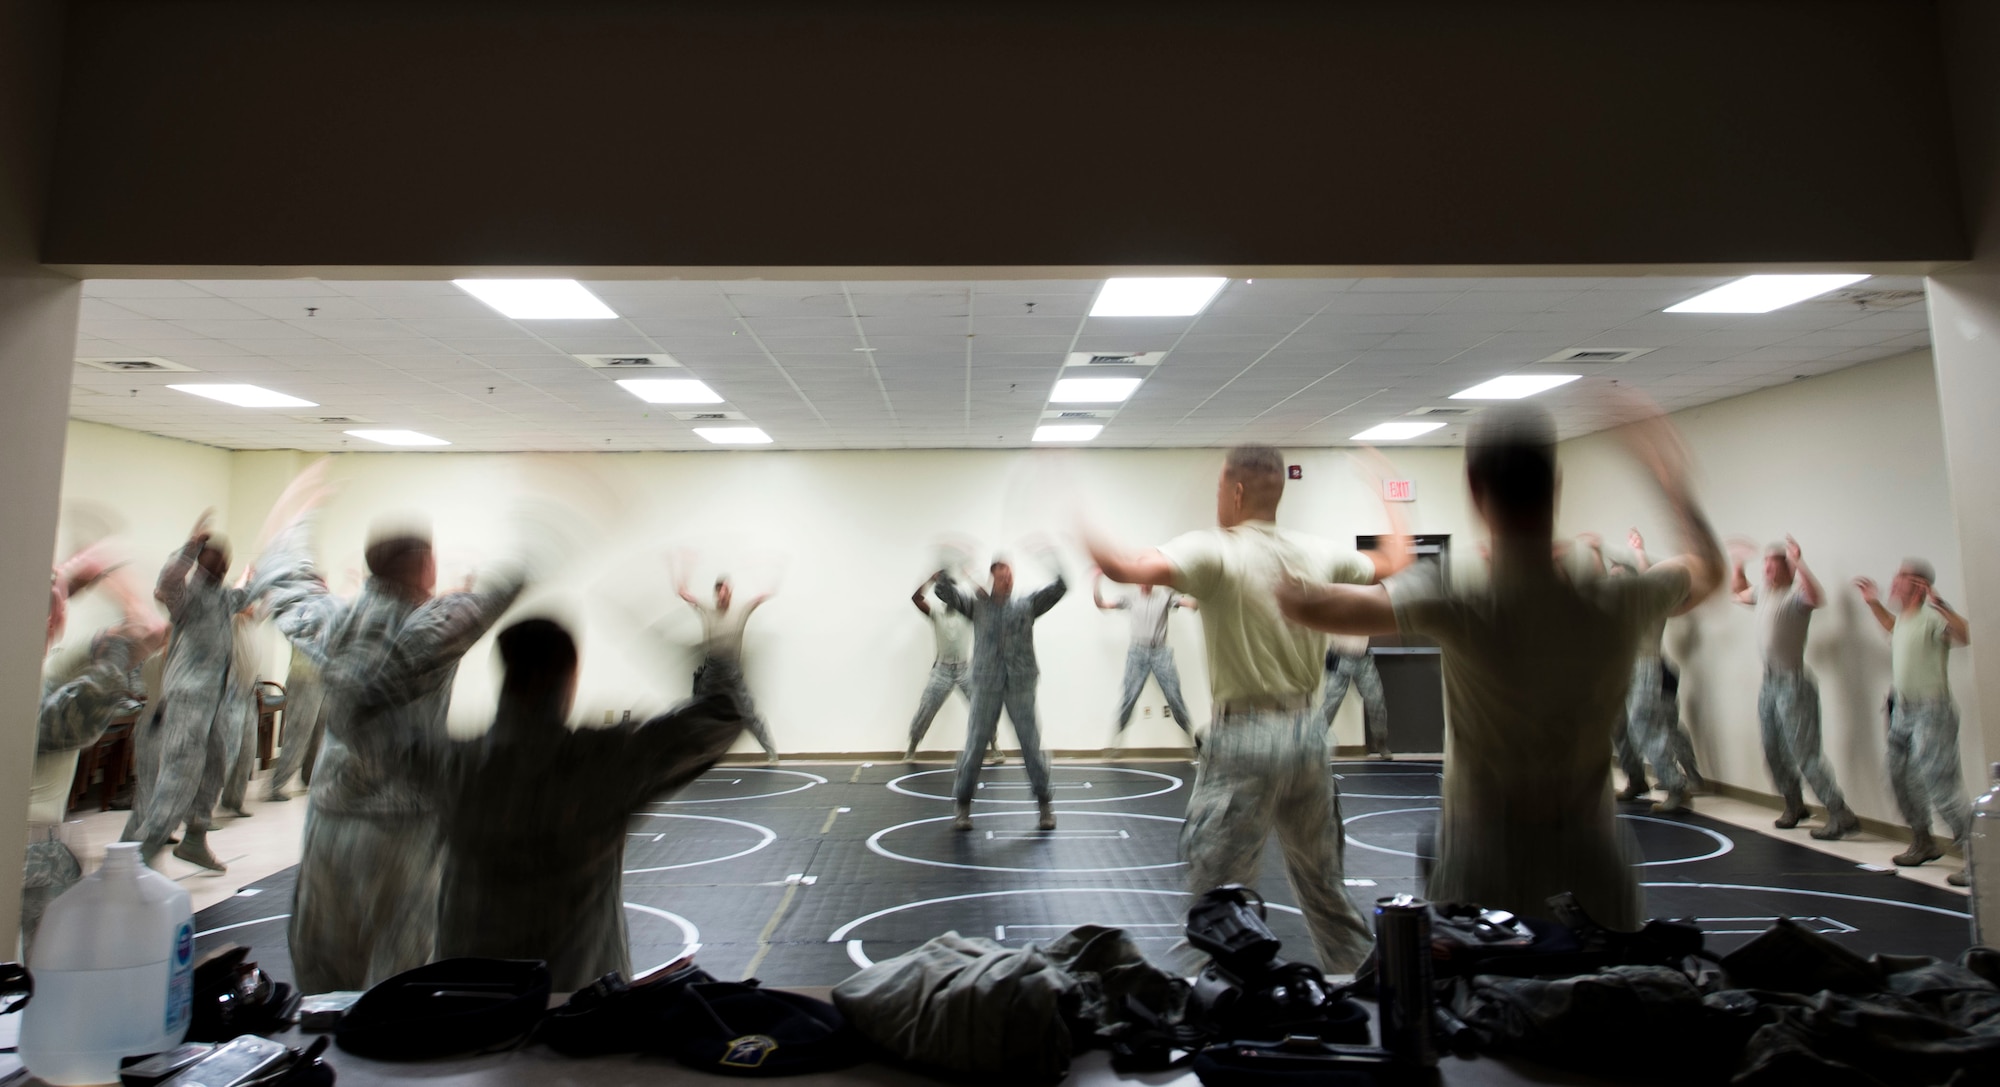 U.S. Airmen assigned to the 20th Security Forces Squadron perform jumping-jacks prior to beginning combatives training at Shaw Air Force Base, S.C., Sept. 5, 2018.